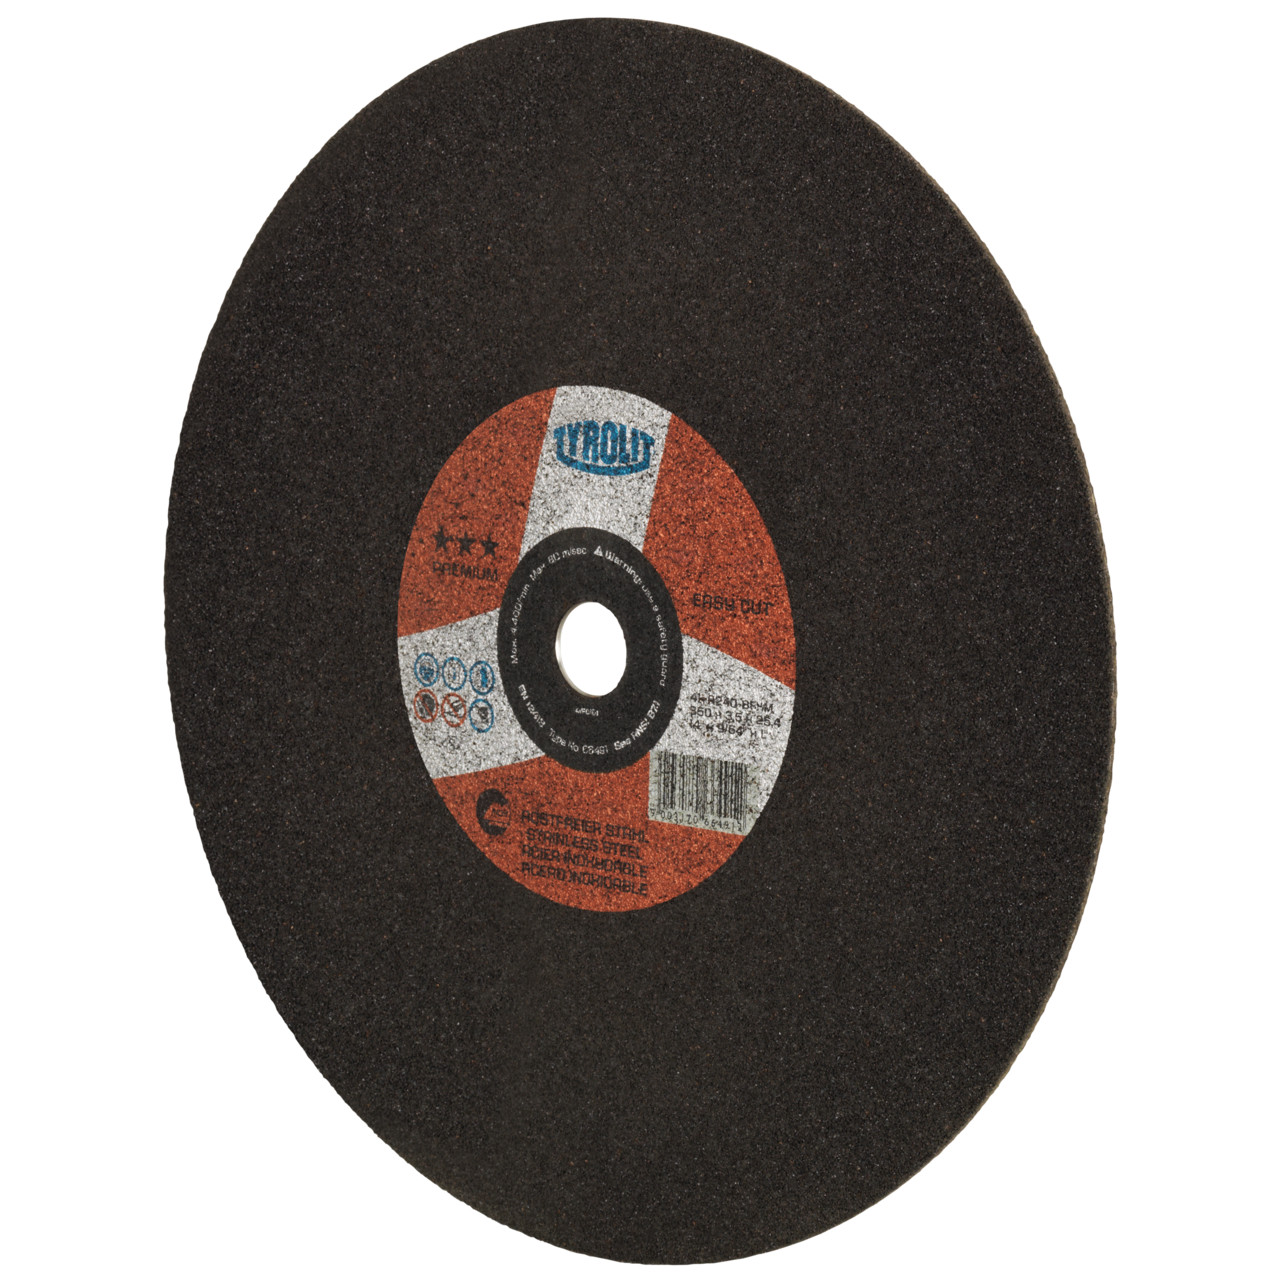 Tyrolit Cutting discs DxDxH 400x3x25.4 For stainless steel, shape: 41 - straight version, Art. 551616